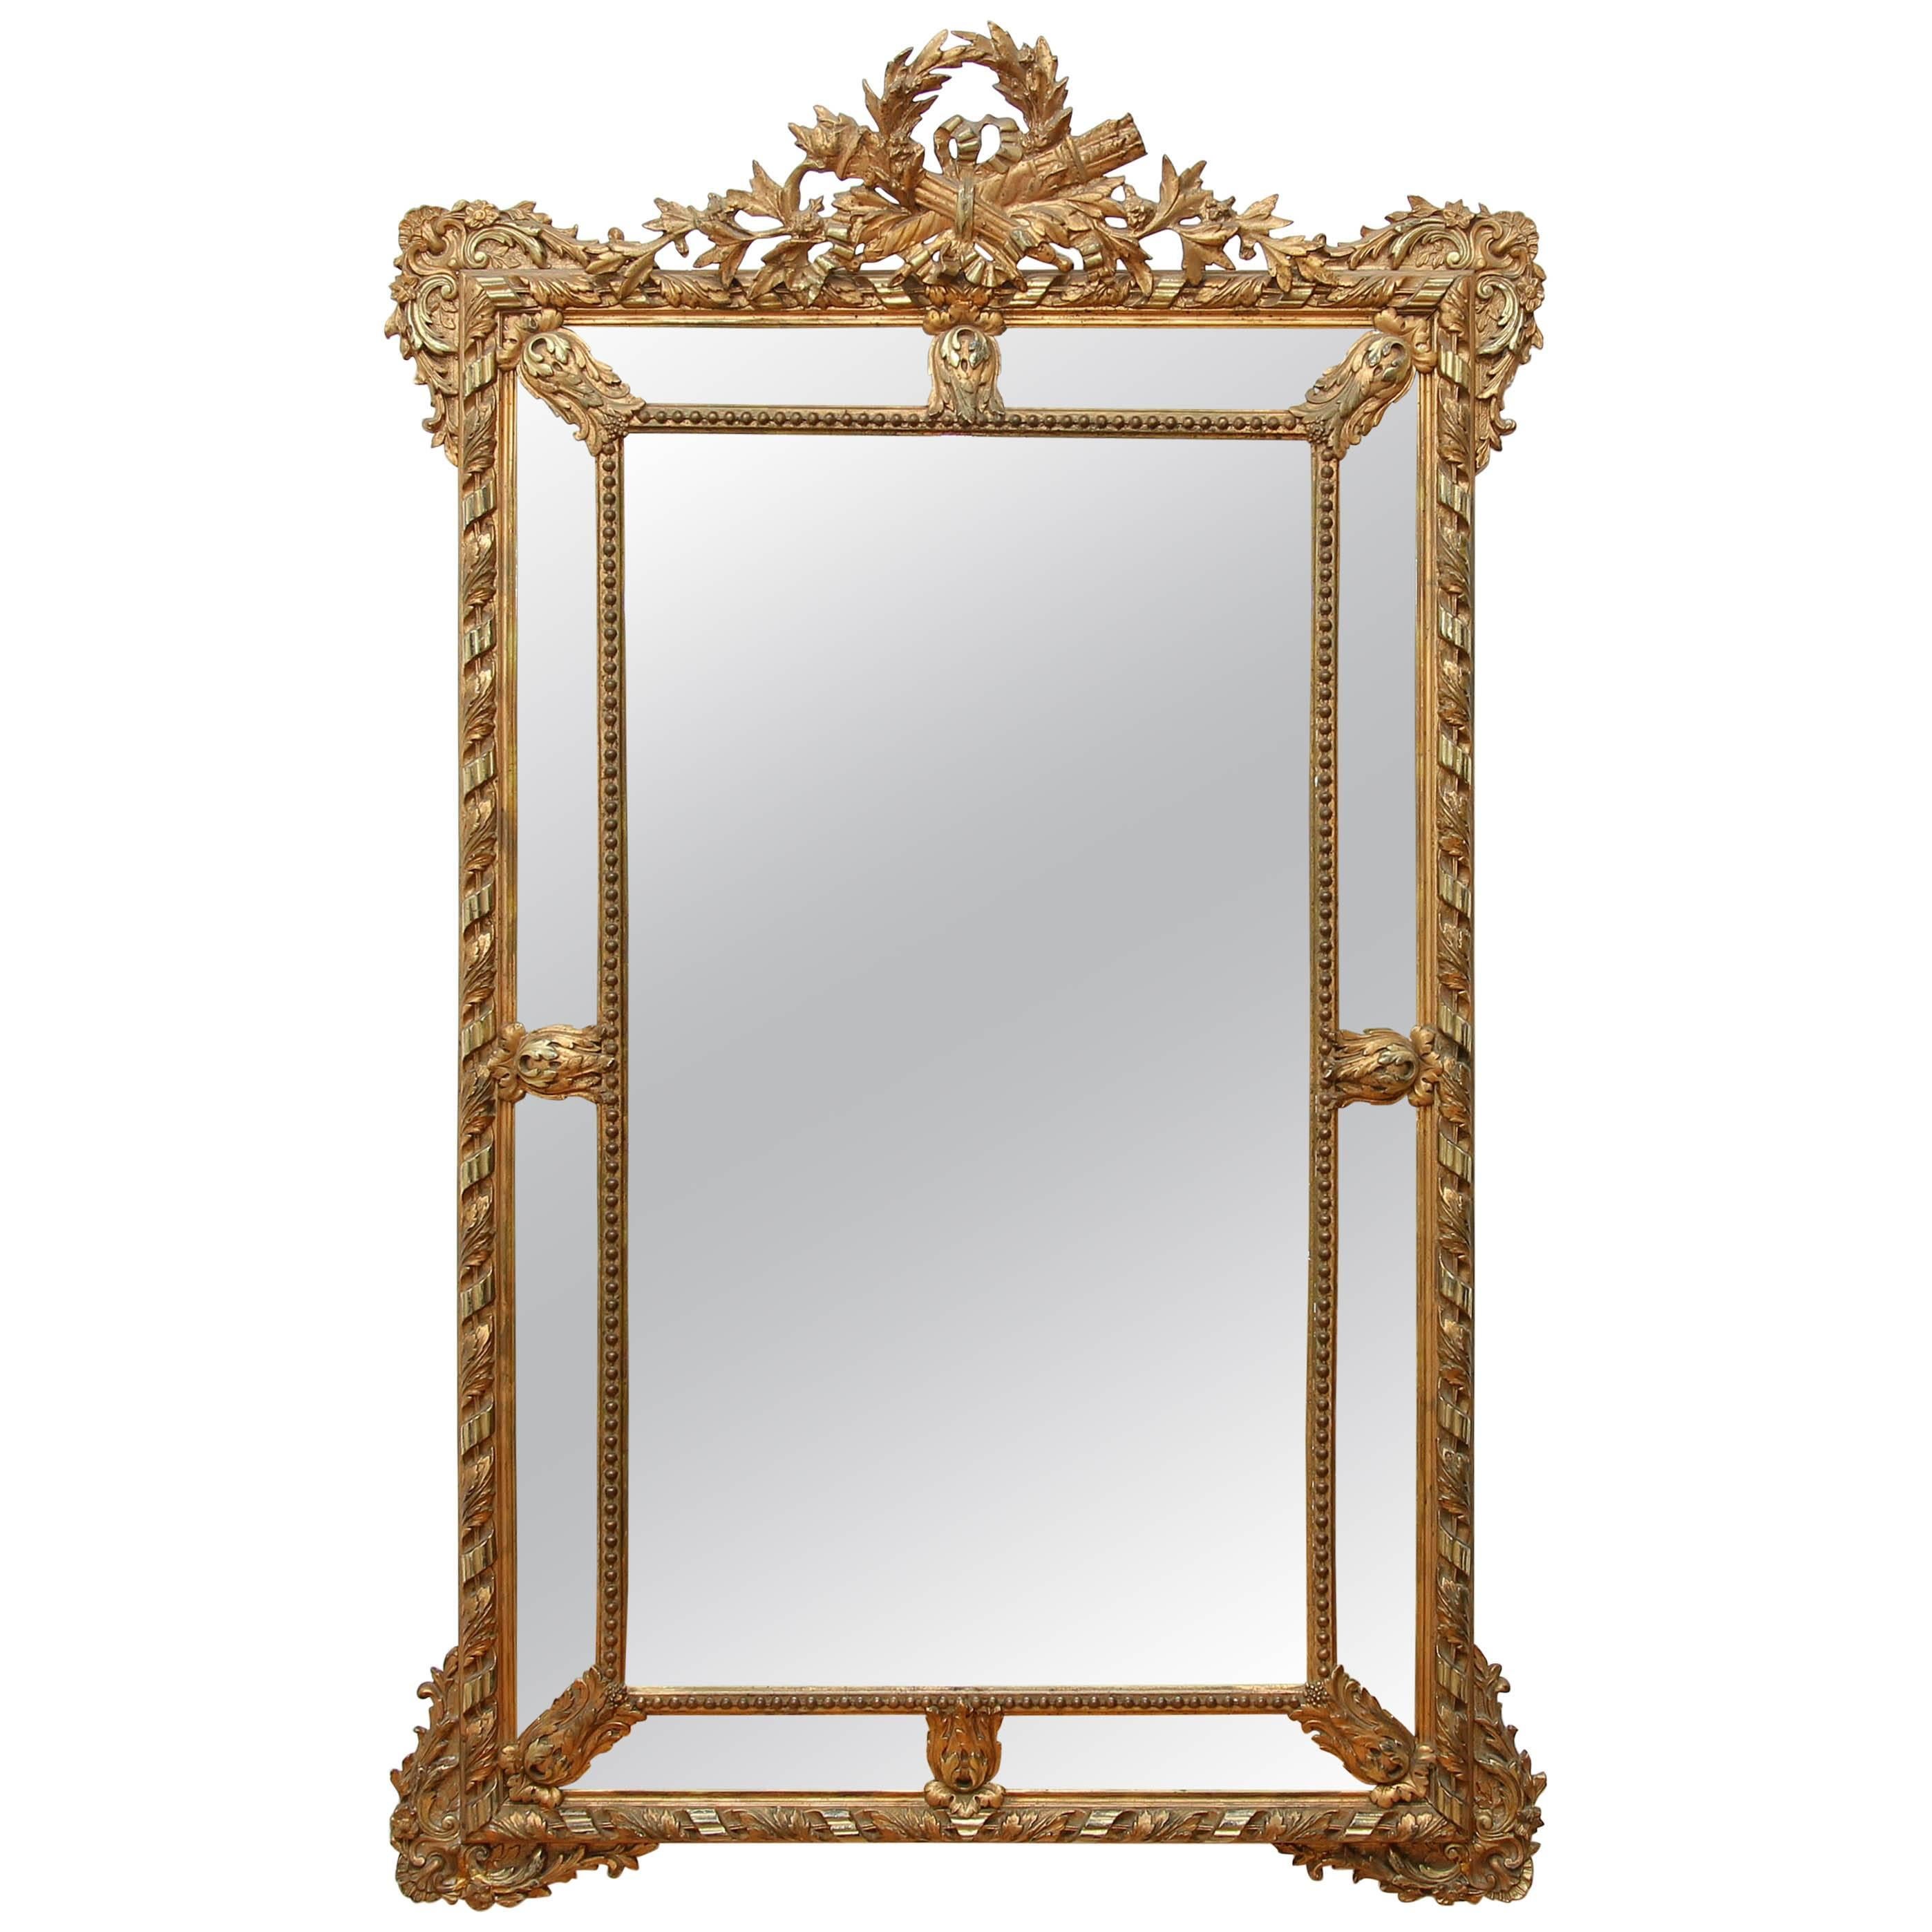 Large Neoclassical Gilt Mirror, French, 19th Century